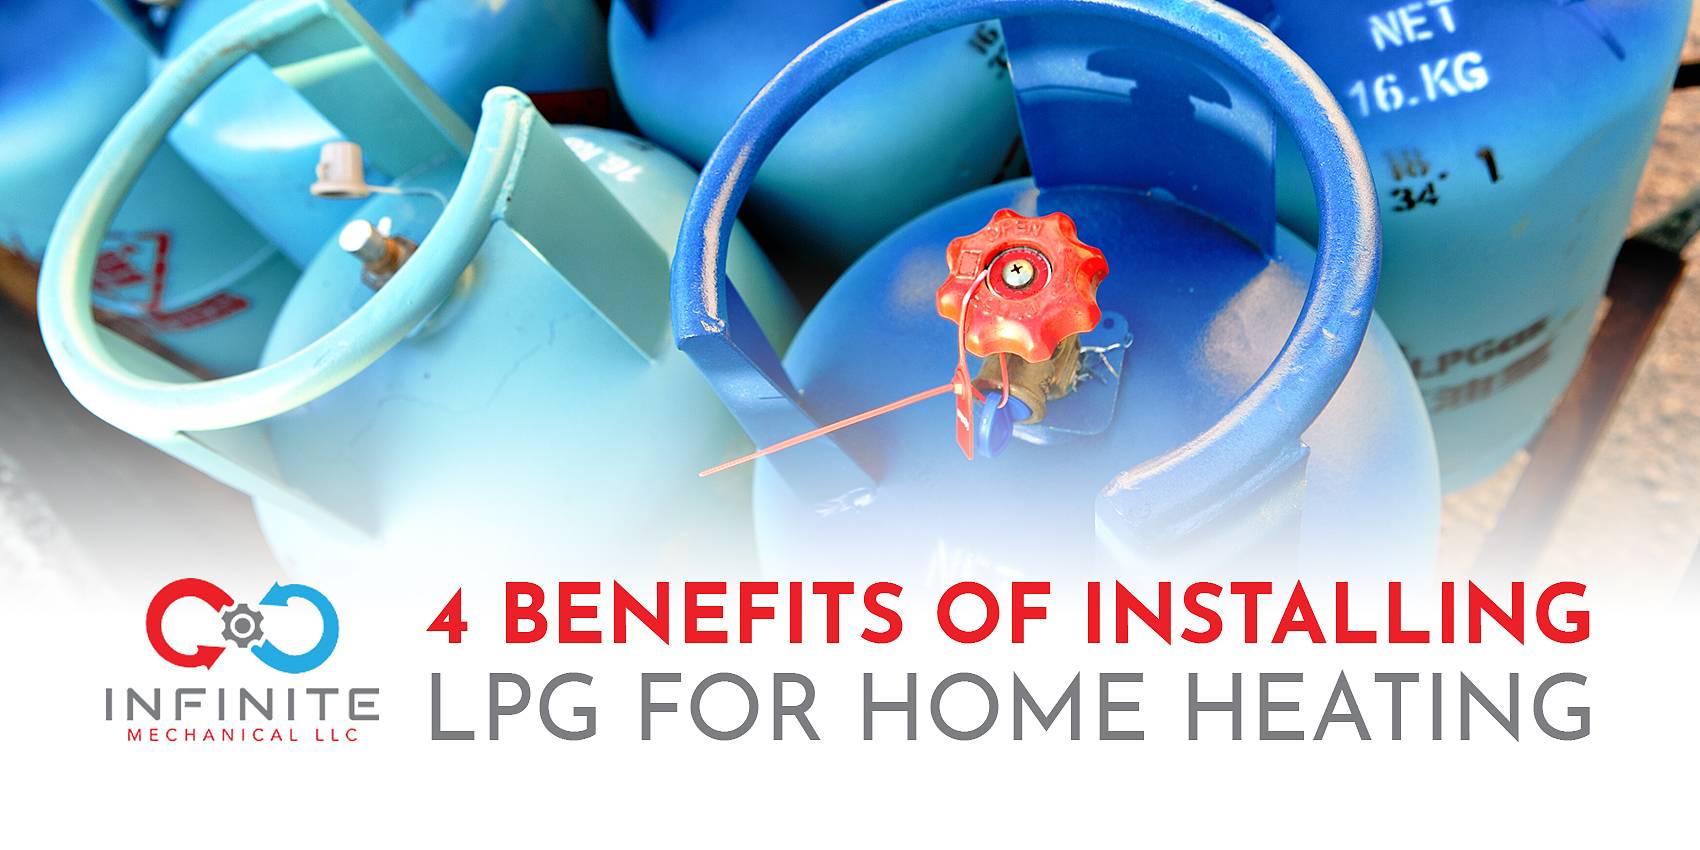 4 Benefits of Installing LPG For Home Heating